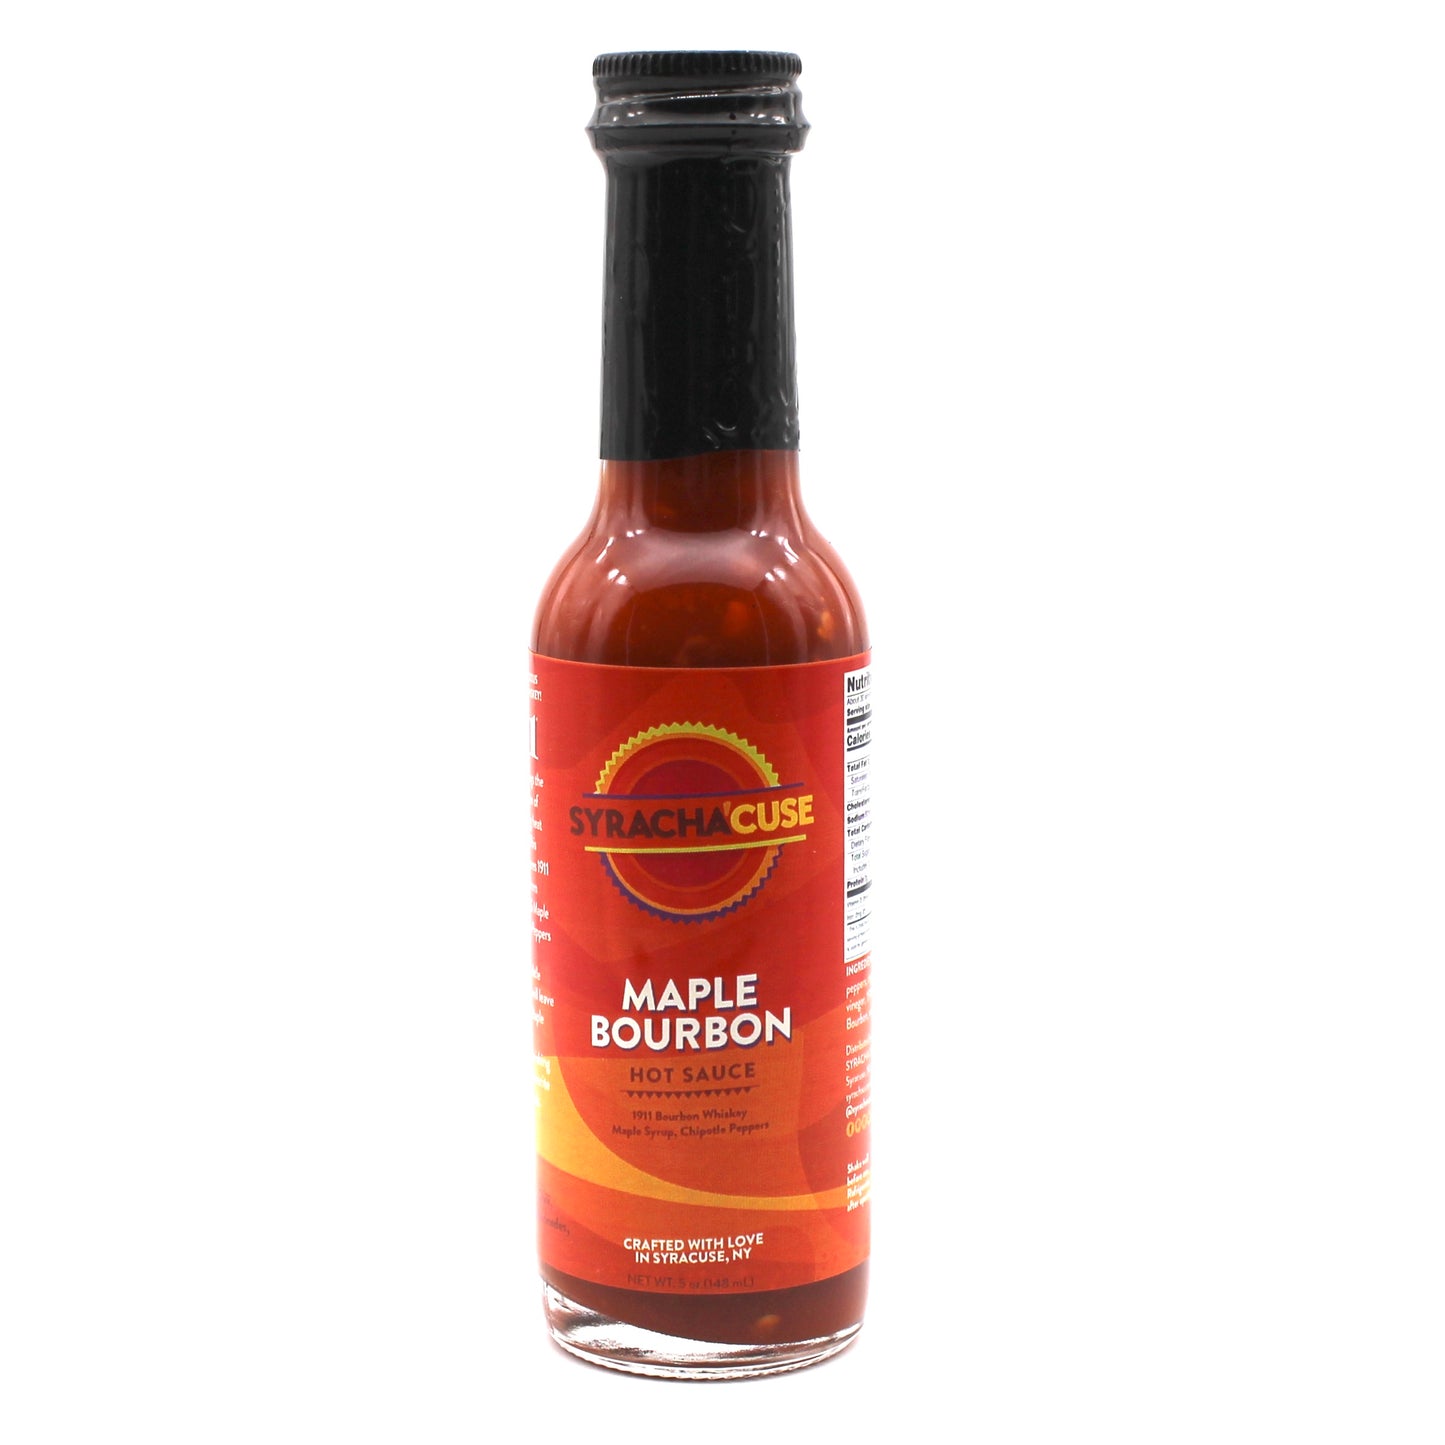 MAPLE BOURBON HOT SAUCE, Satisfying heat, smooth bourbon flavor made with 1911 bourbon whiskey.